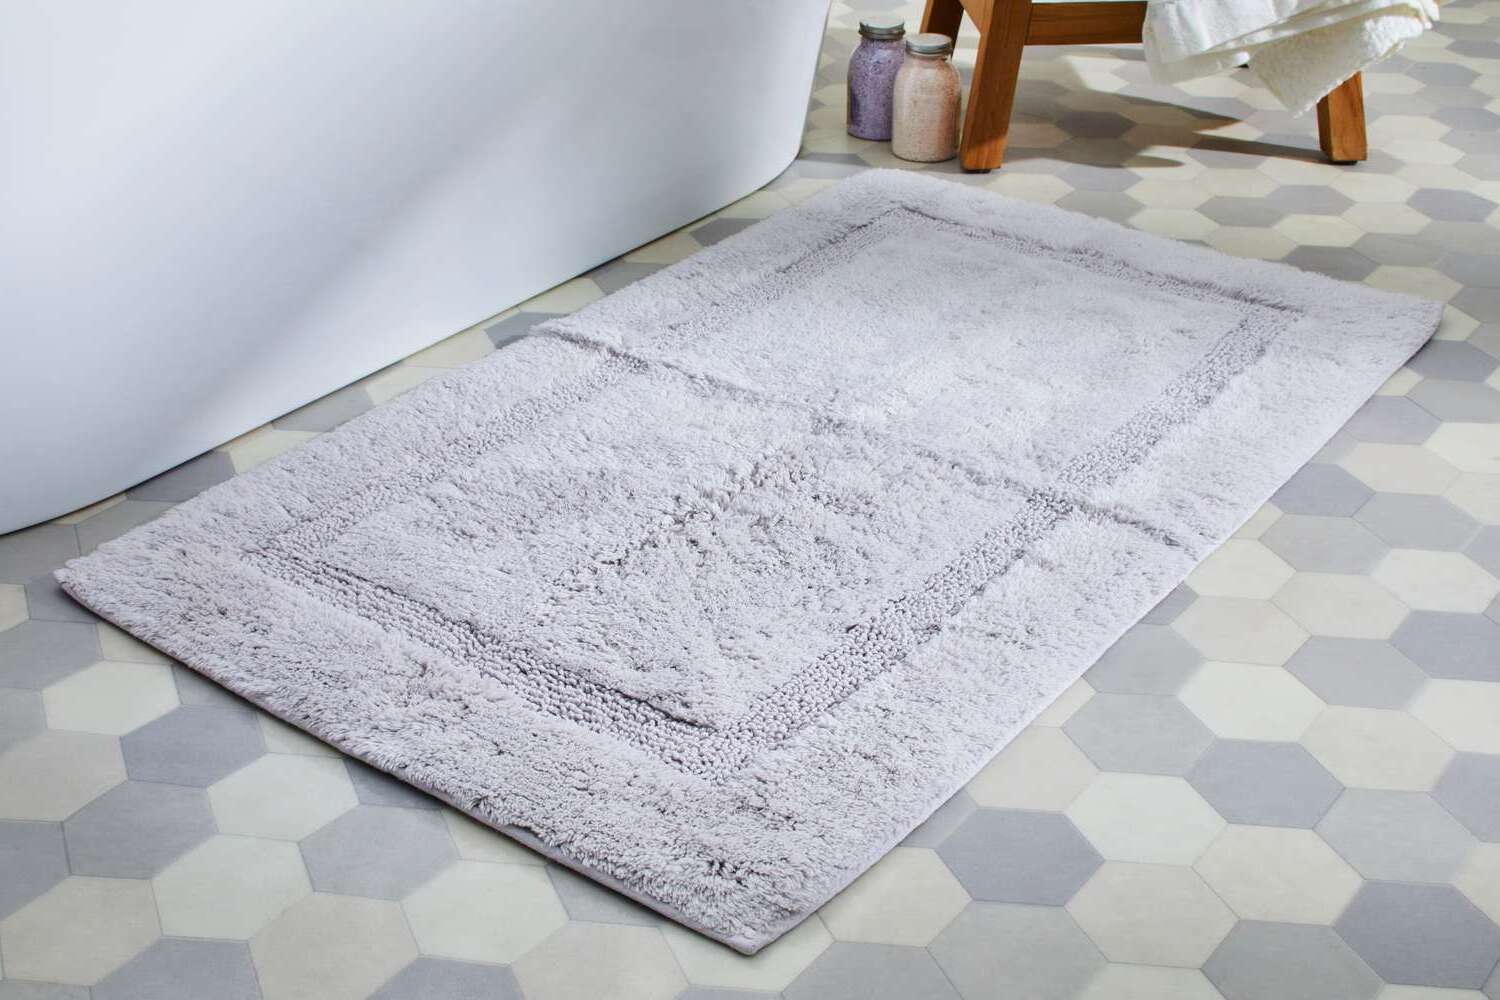 How to Make Your Own DIY Bath Mat